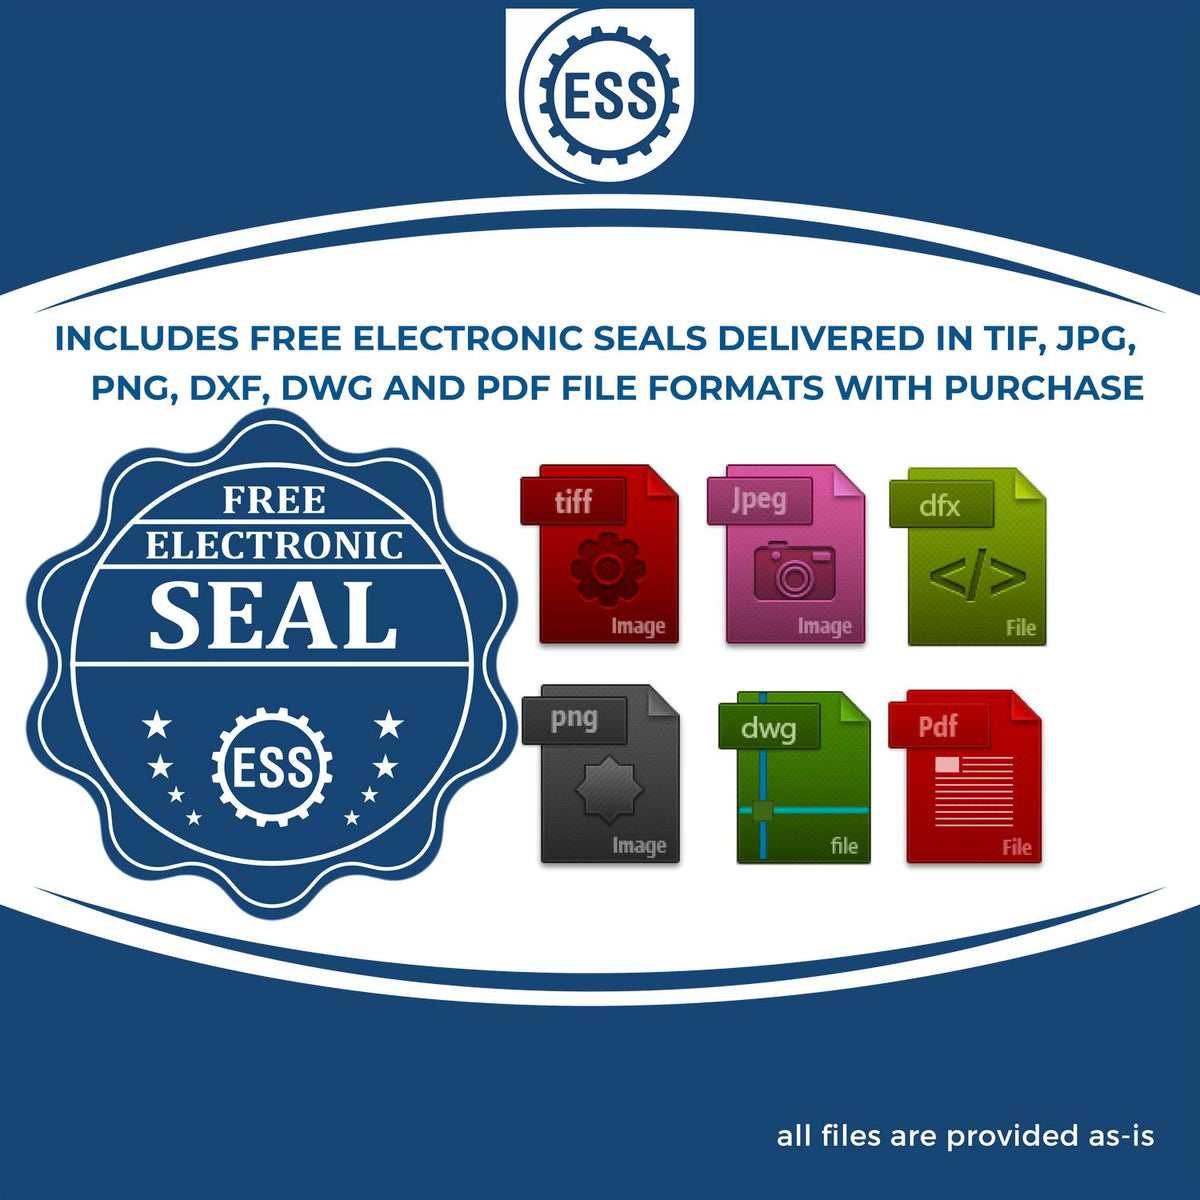 An infographic for the free electronic seal for the Montana Engineer Desk Seal illustrating the different file type icons such as DXF, DWG, TIF, JPG and PNG.